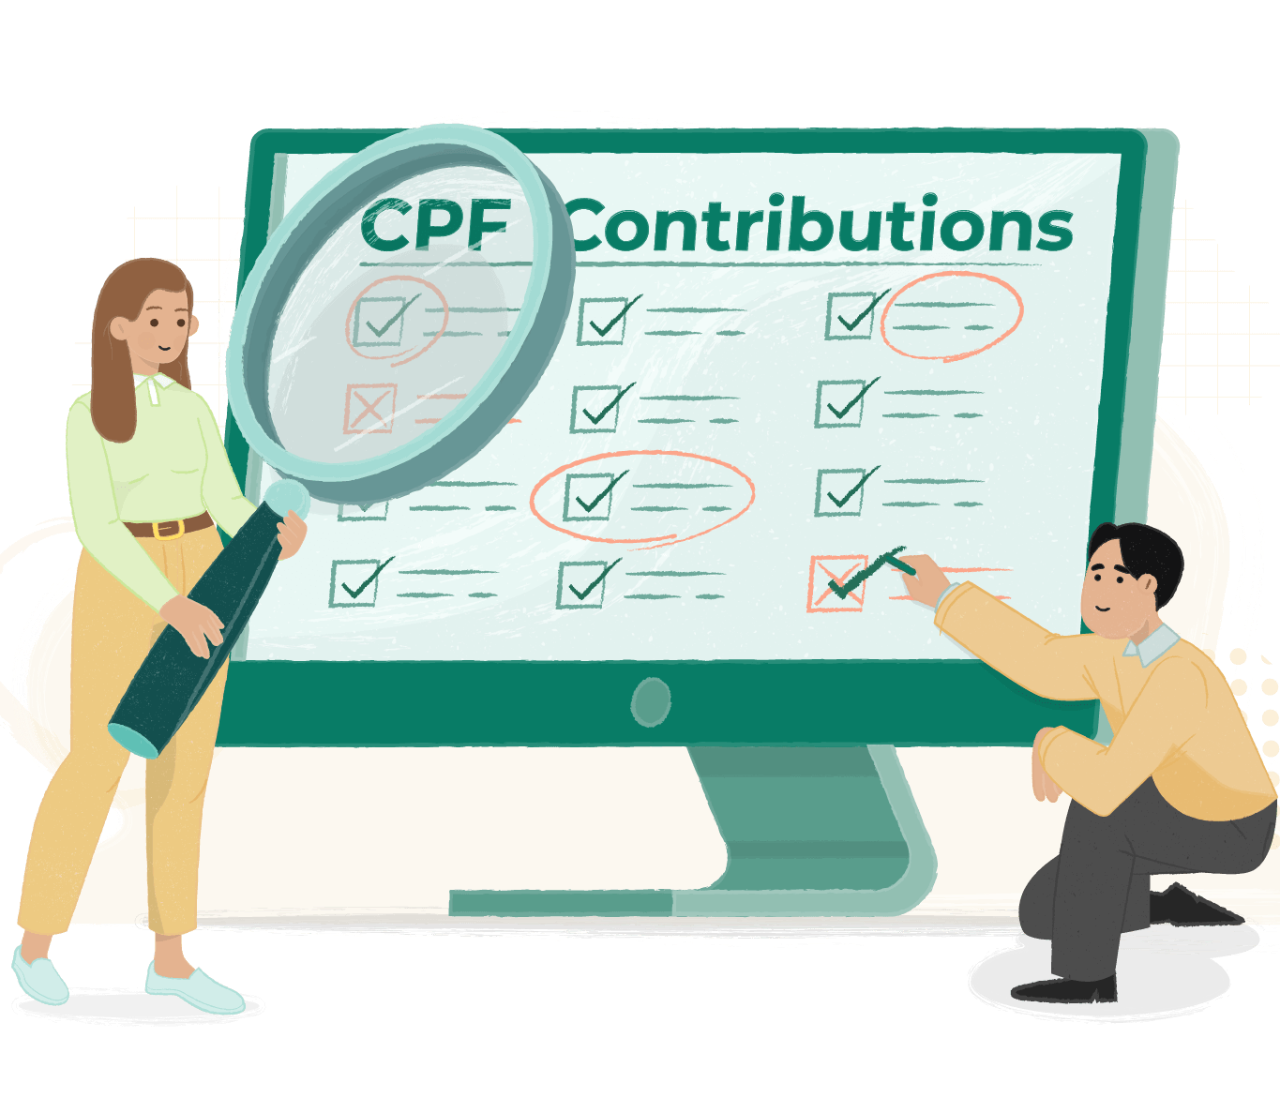 Self-rectifying errors made in CPF contributions